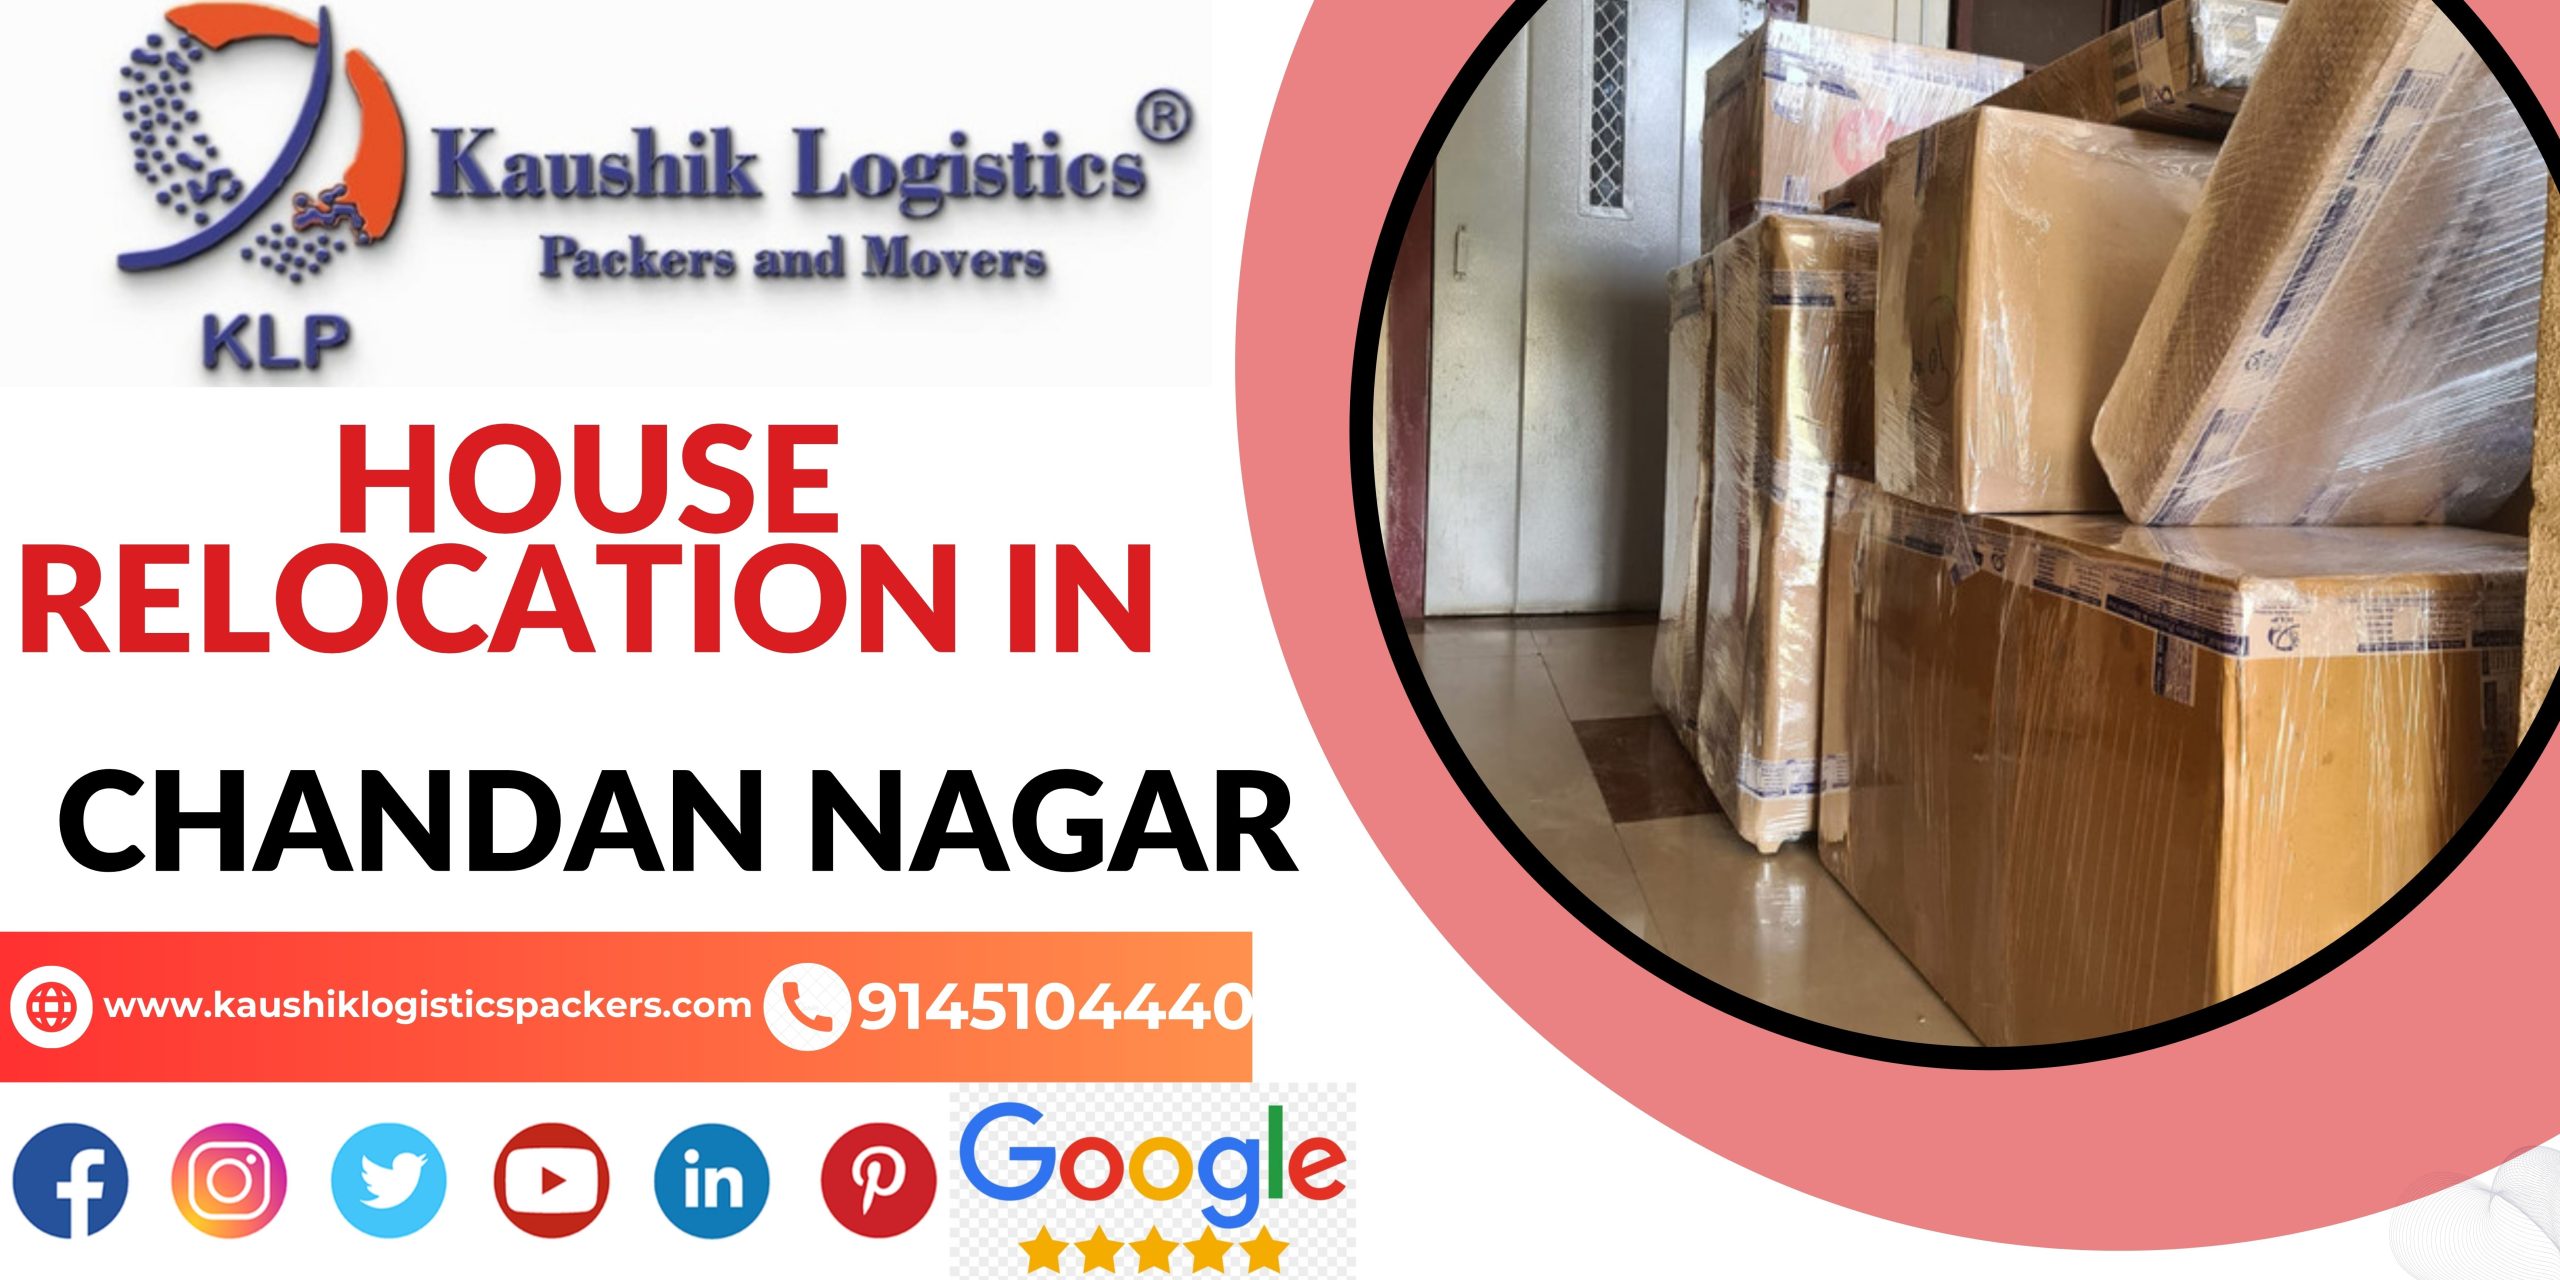 Packers and Movers In Chandan Nagar